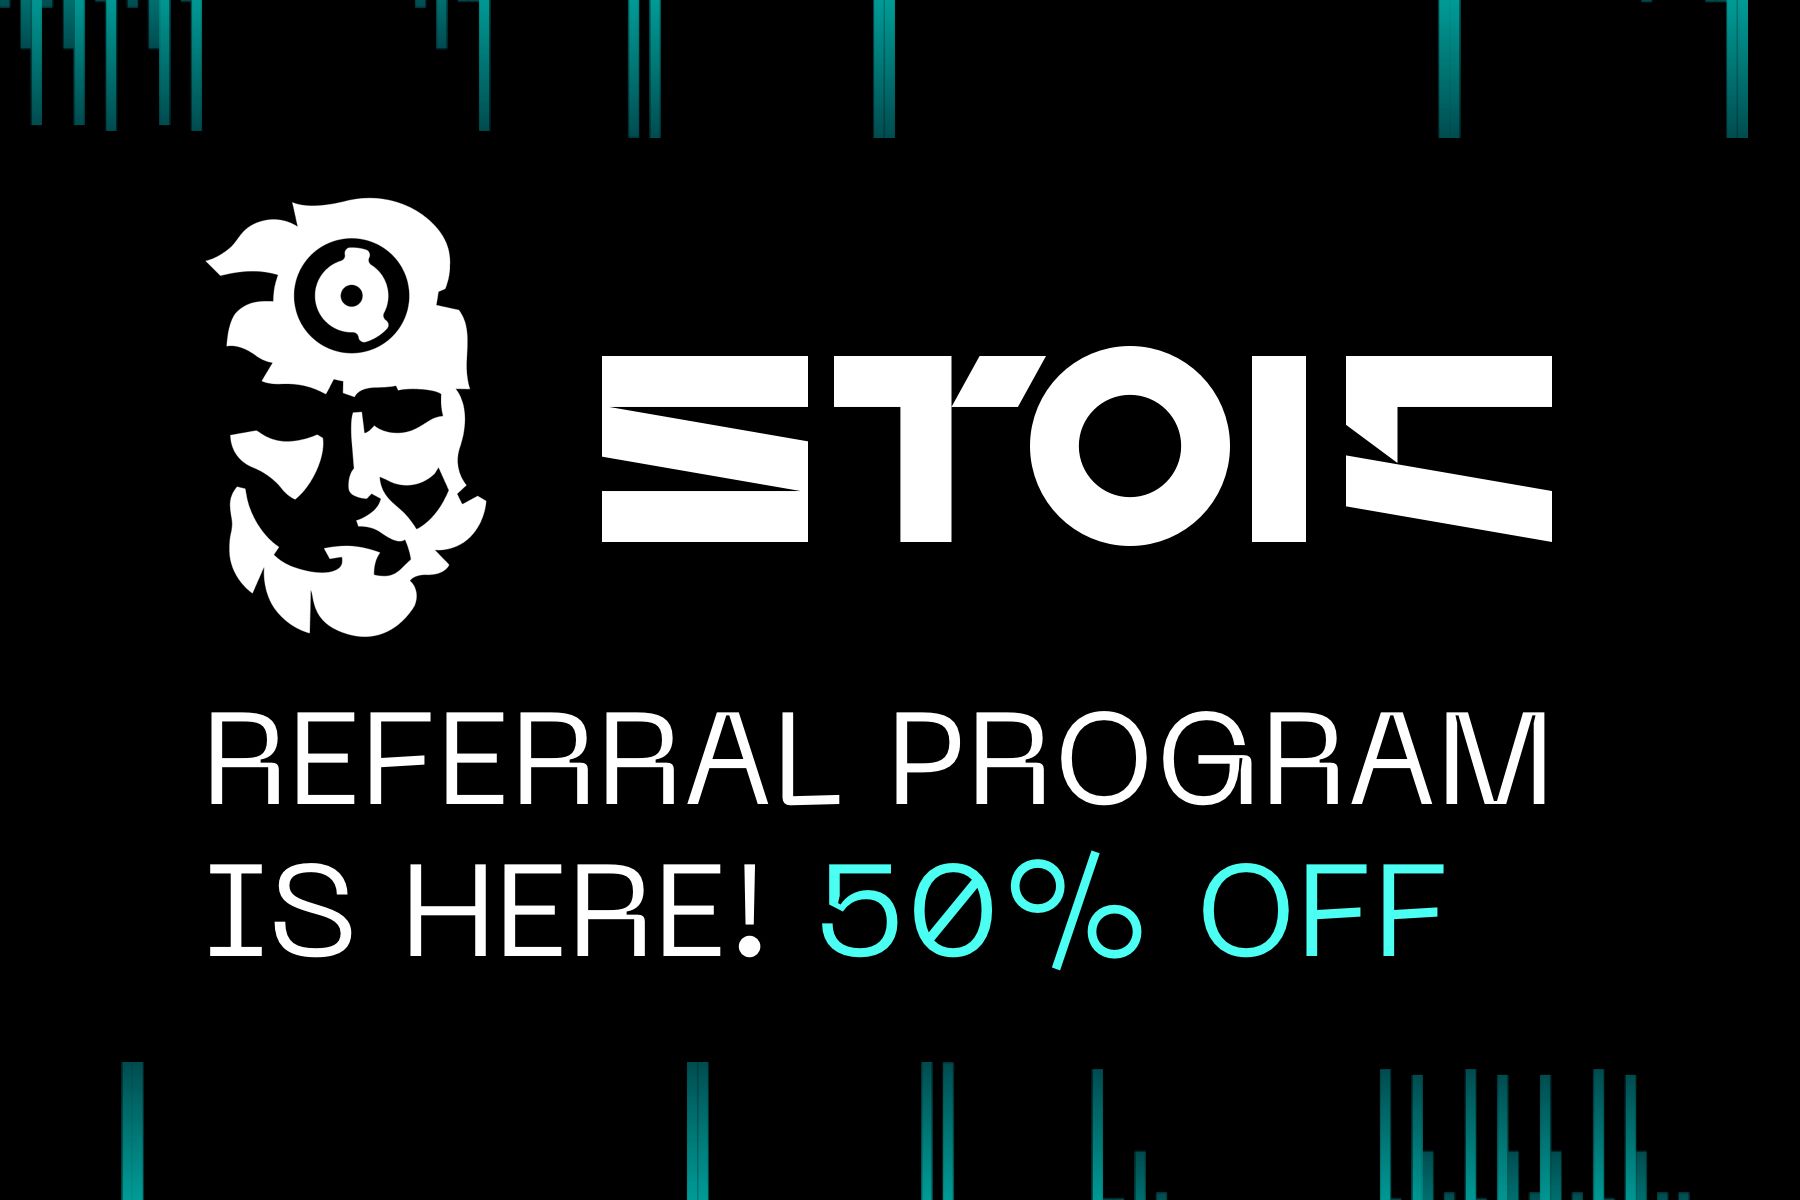 Stoic Referral Program is Here! Invite Friends and Get Up to 50% Off